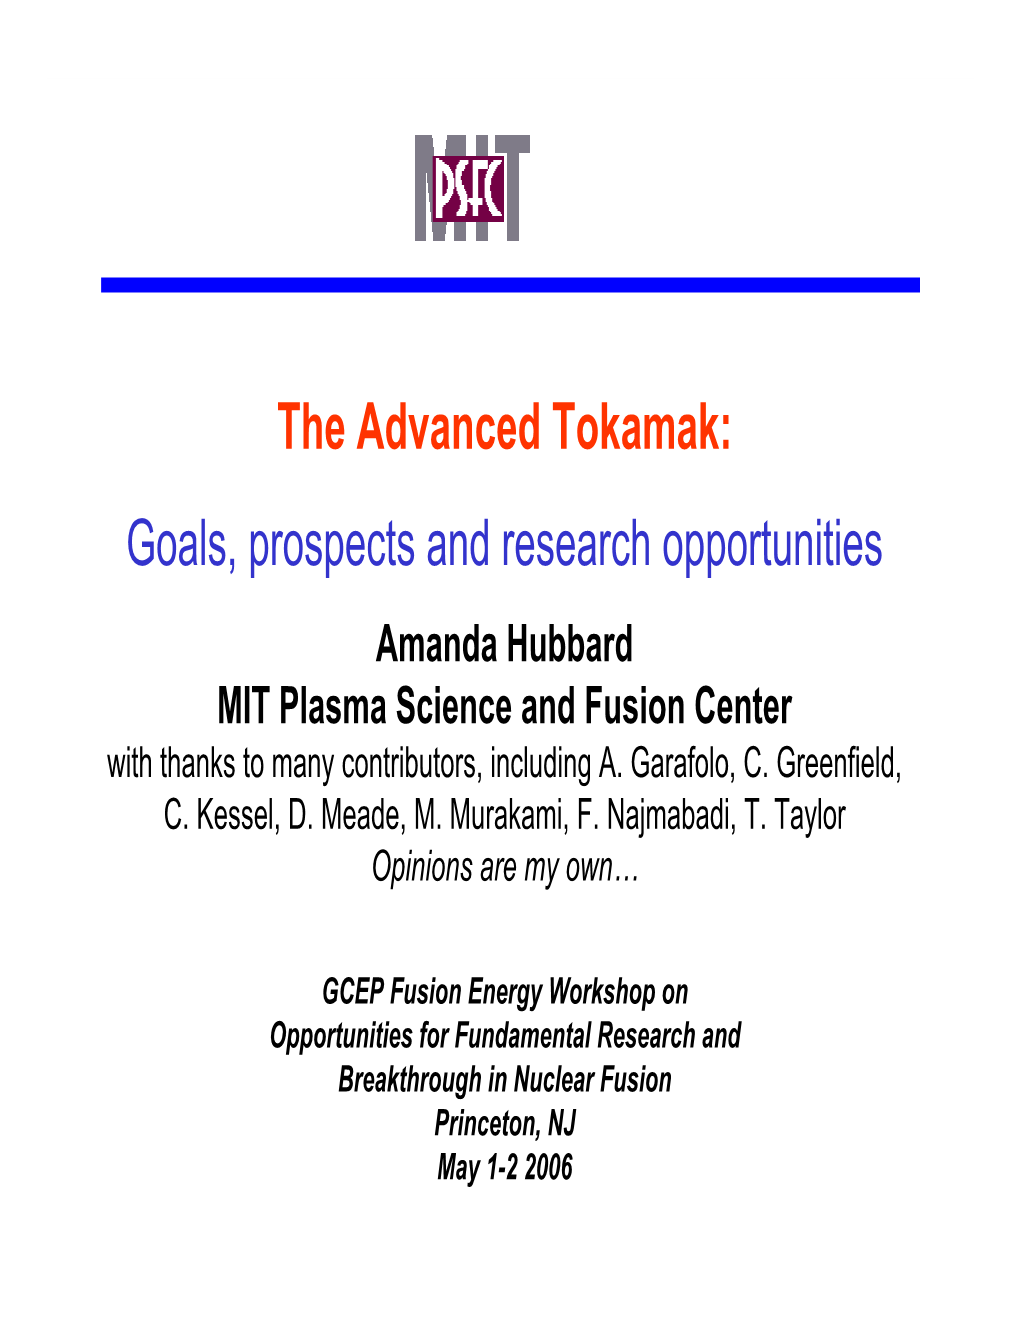 The Advanced Tokamak: Goals, Prospects and Research Opportunities Amanda Hubbard MIT Plasma Science and Fusion Center with Thanks to Many Contributors, Including A